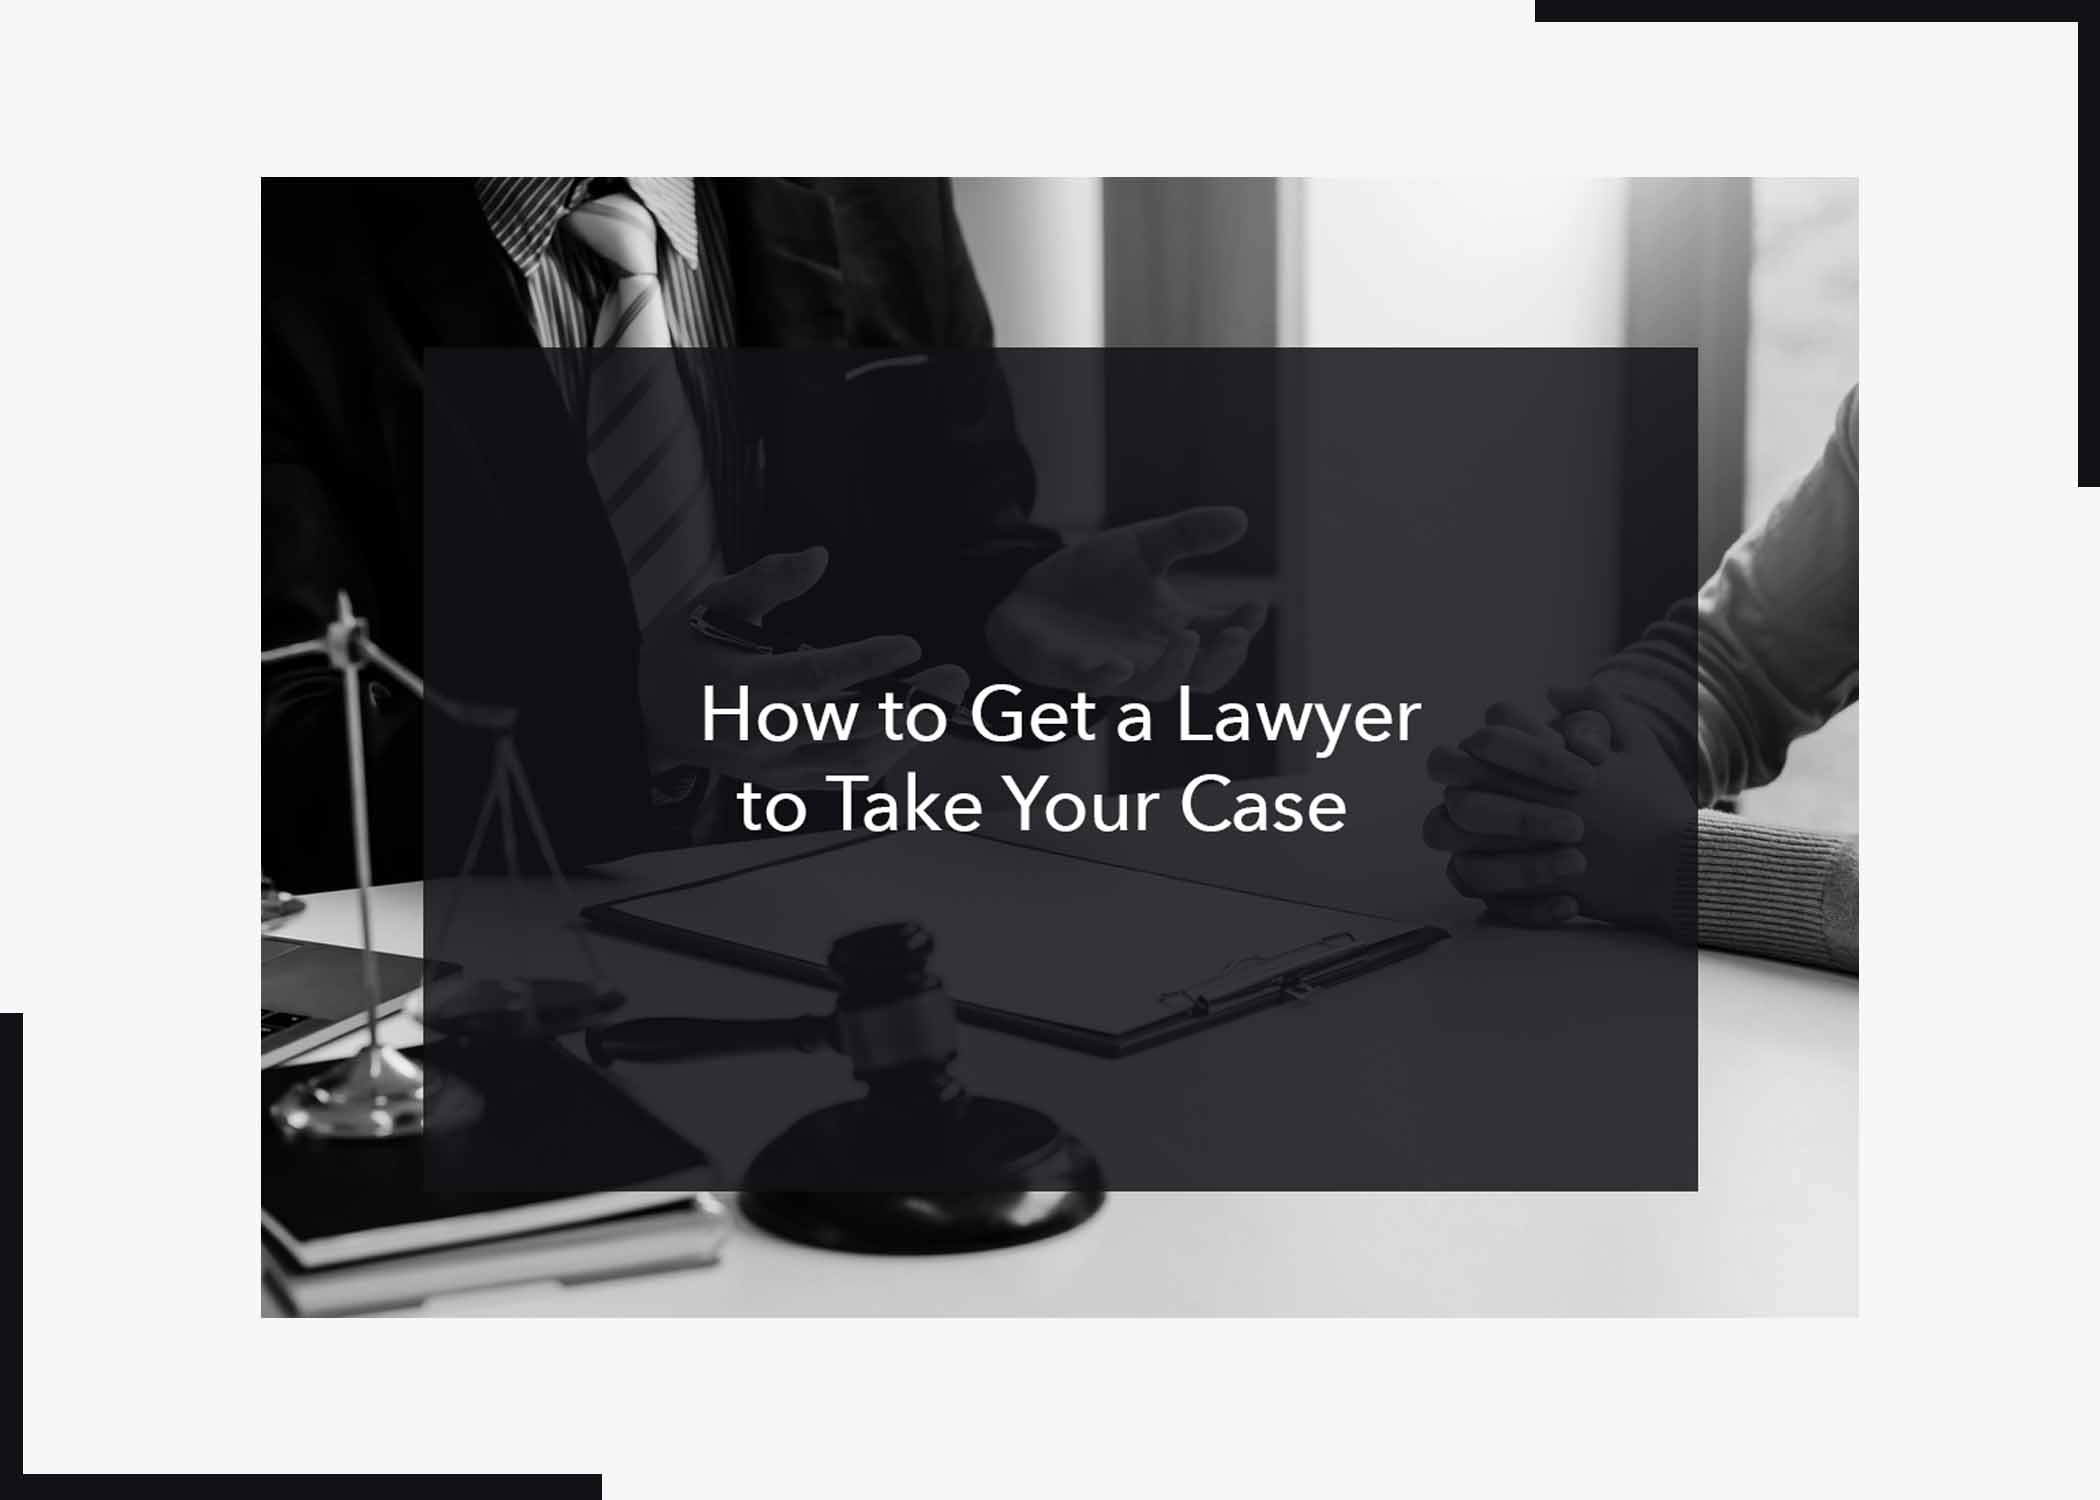 How to Get a Lawyer to Take Your Case